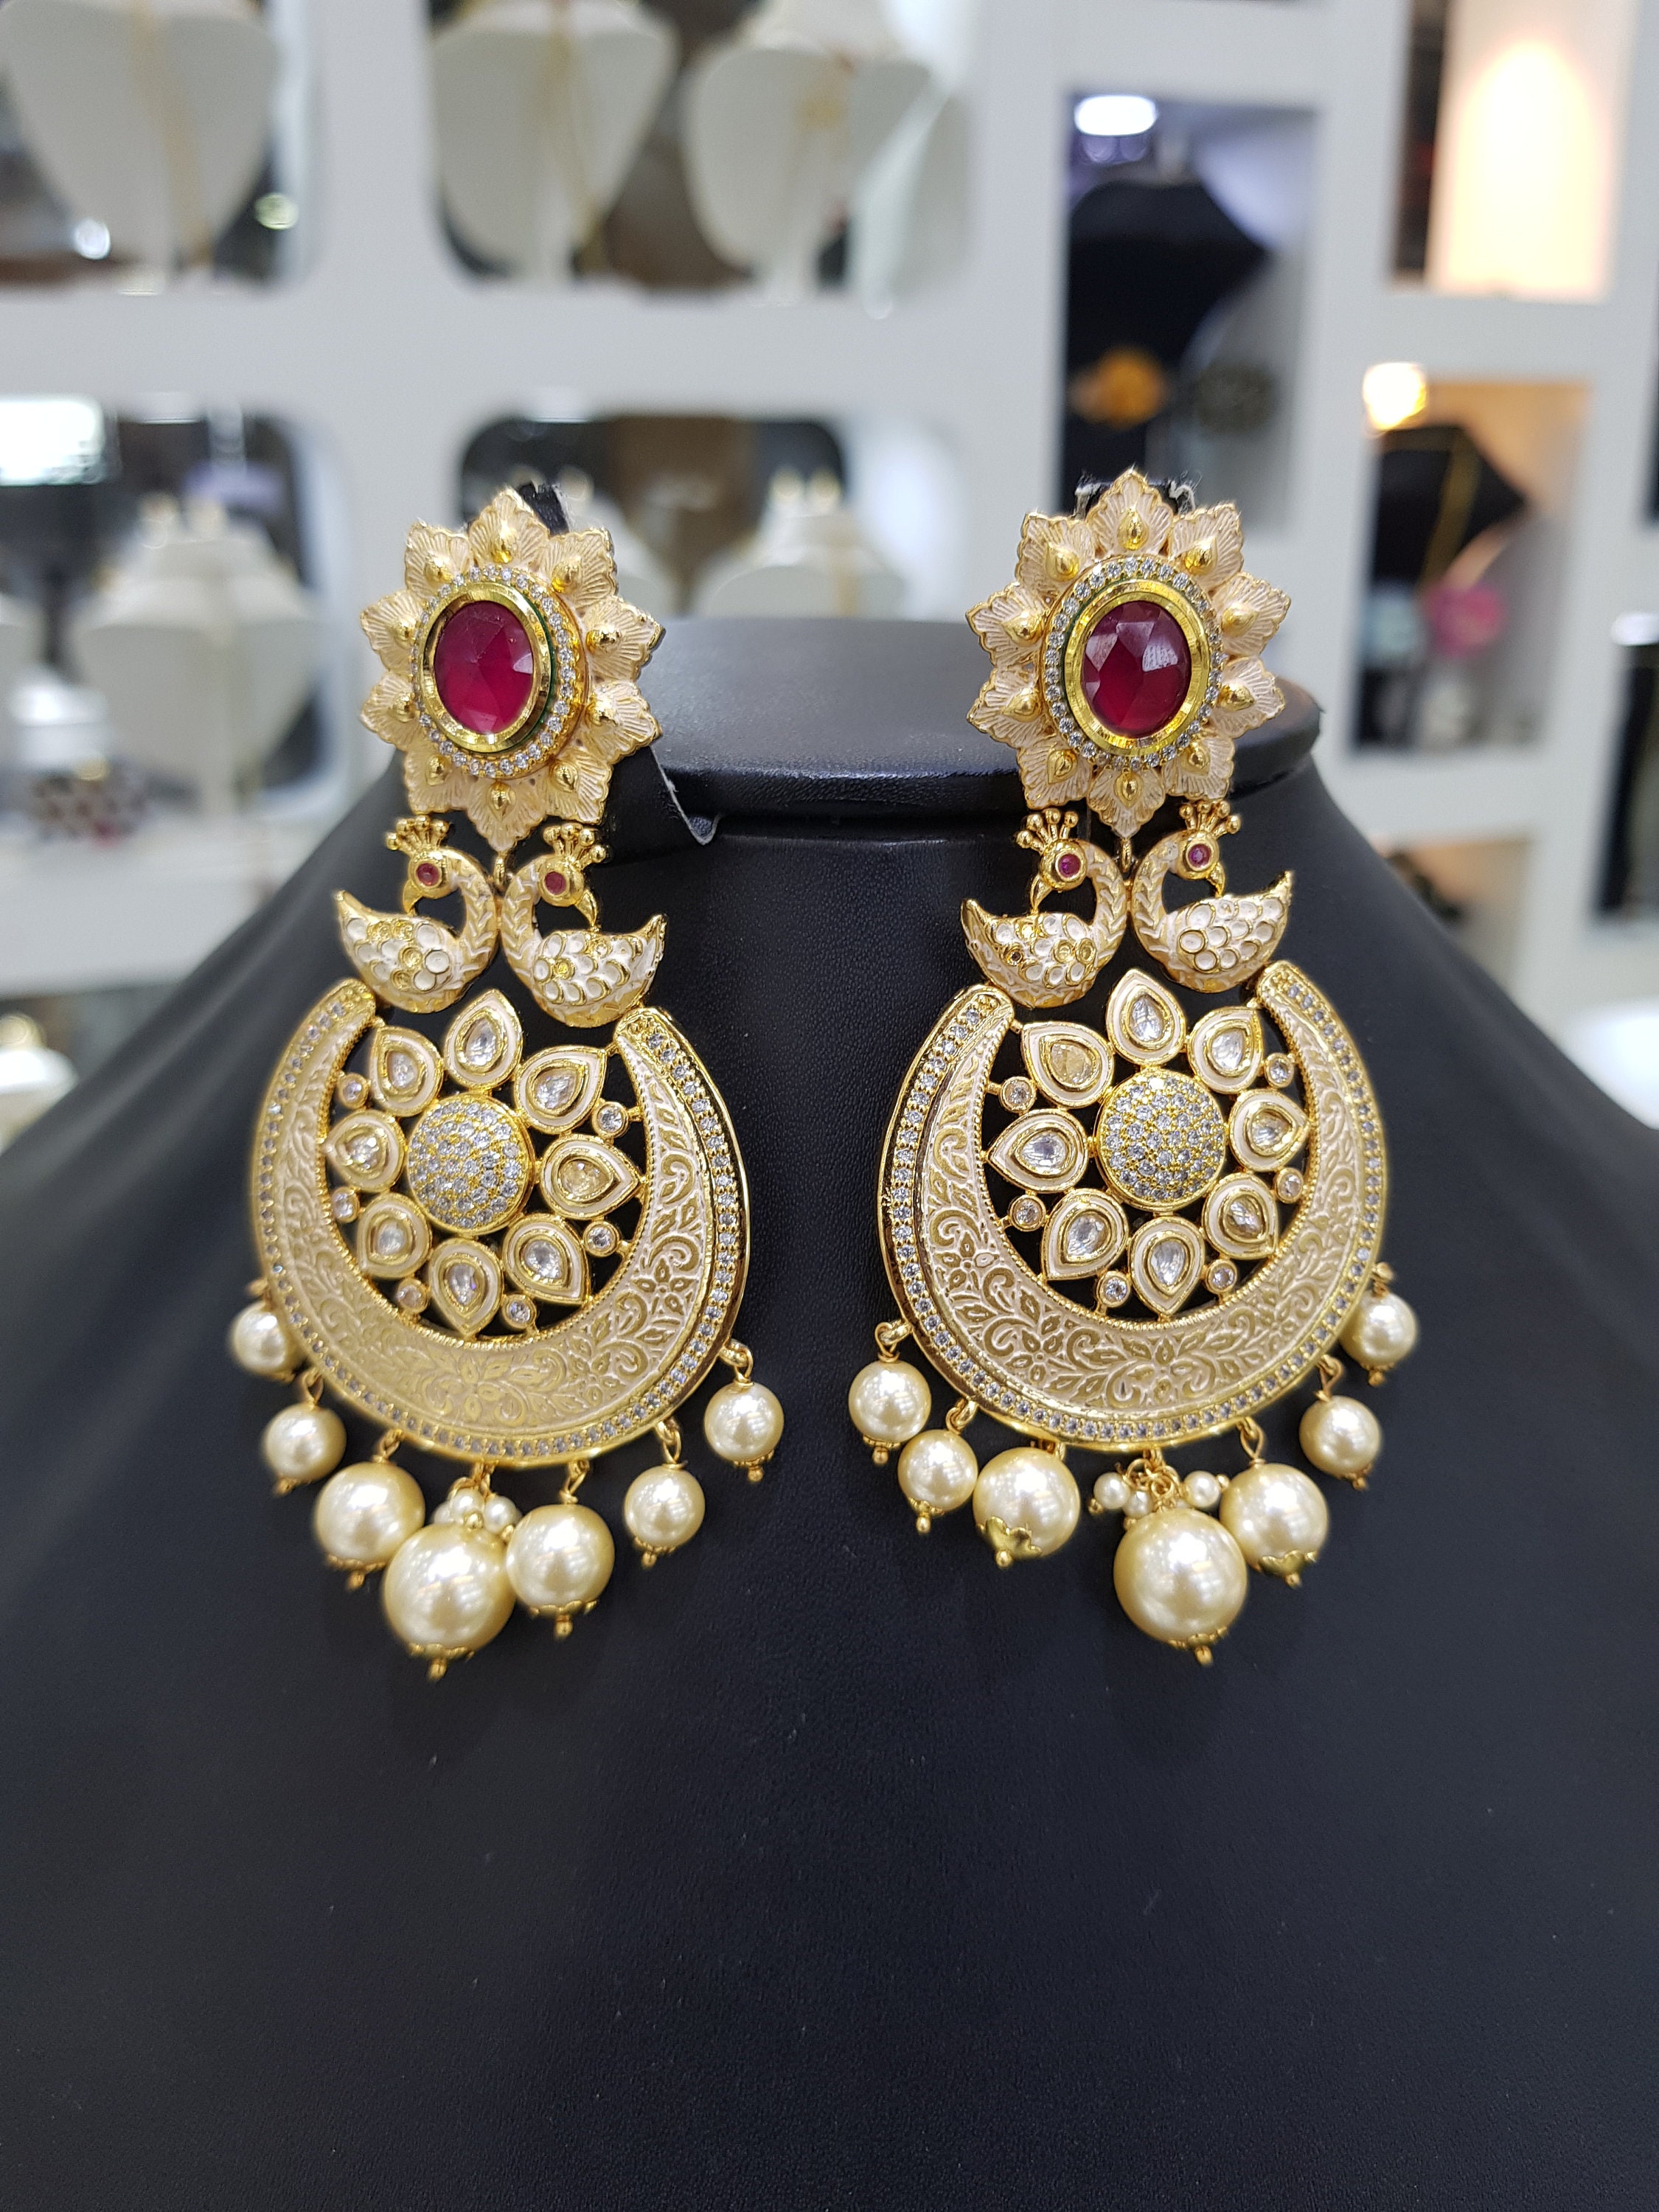 Chandbali Jewelry Set Gold Clustered Pearl Necklace Earring India Crescent  Moon Bollywood Ethnic Indian Jewelry - Jewelry Sets